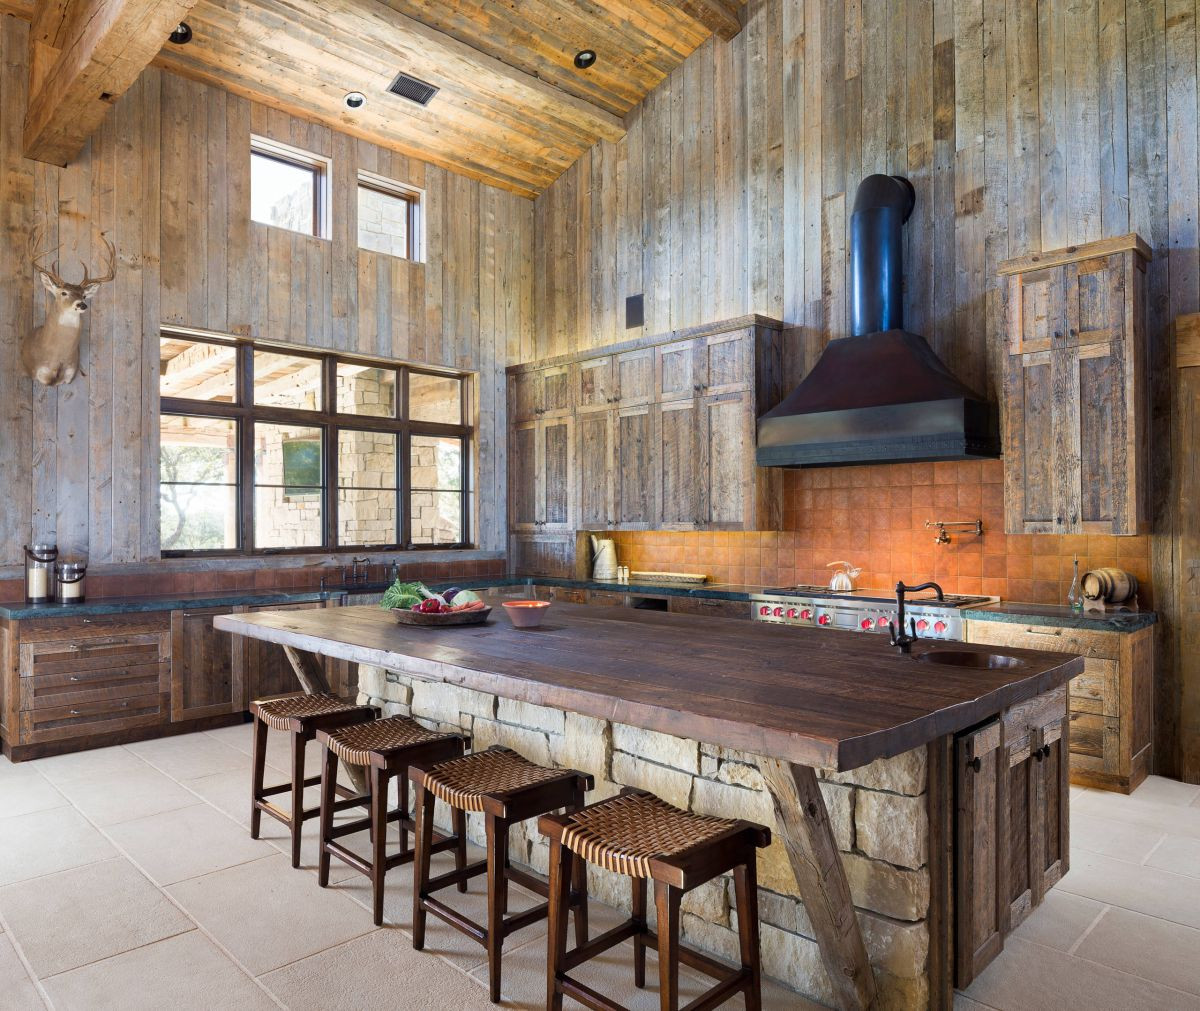 Rustic Kitchen Island Ideas
 15 Rustic Kitchen Islands Perfect for Any Kitchen